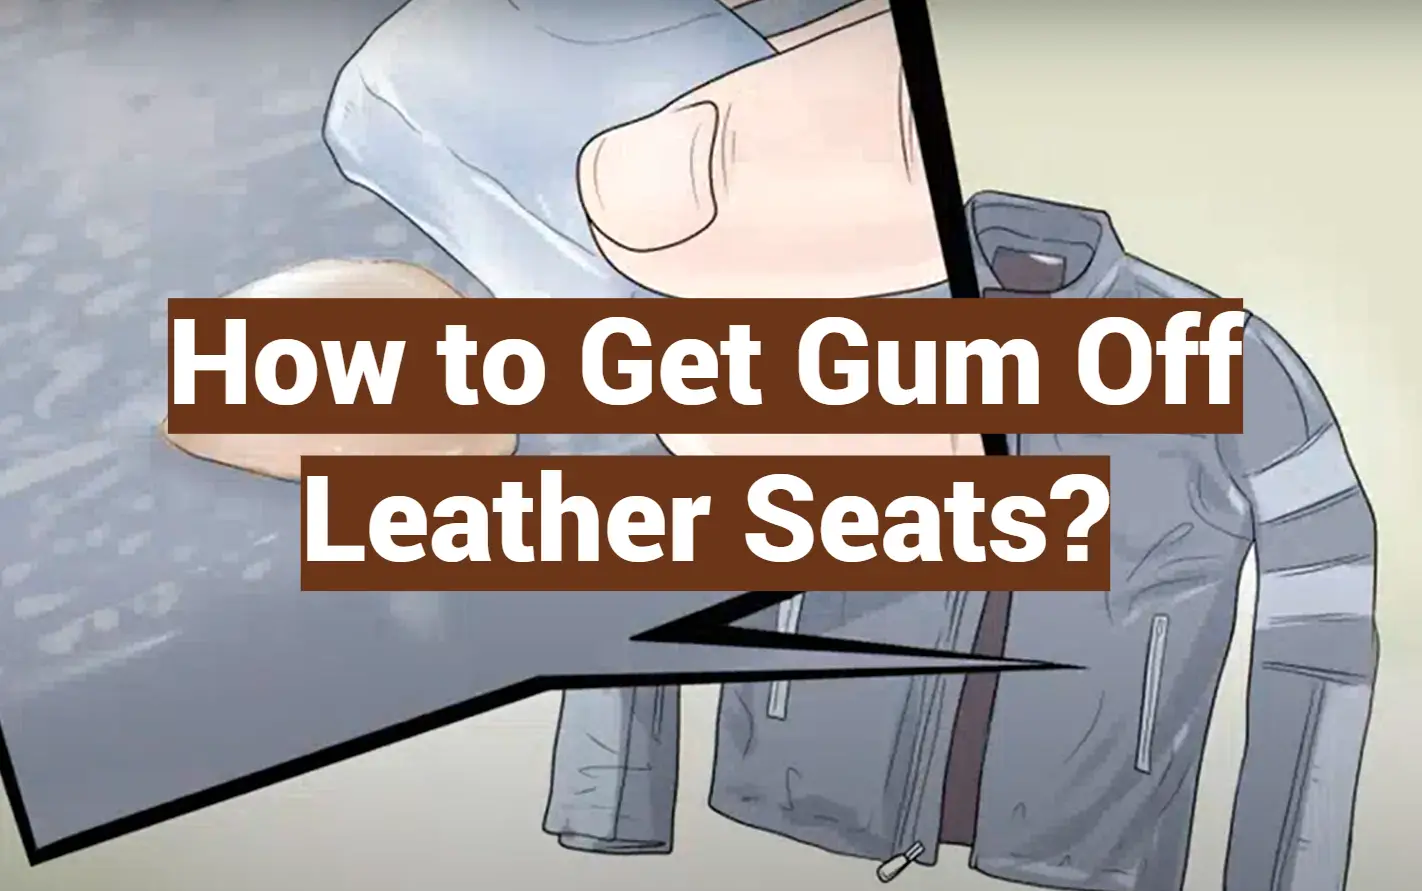 How to Get Gum Off Leather Seats?